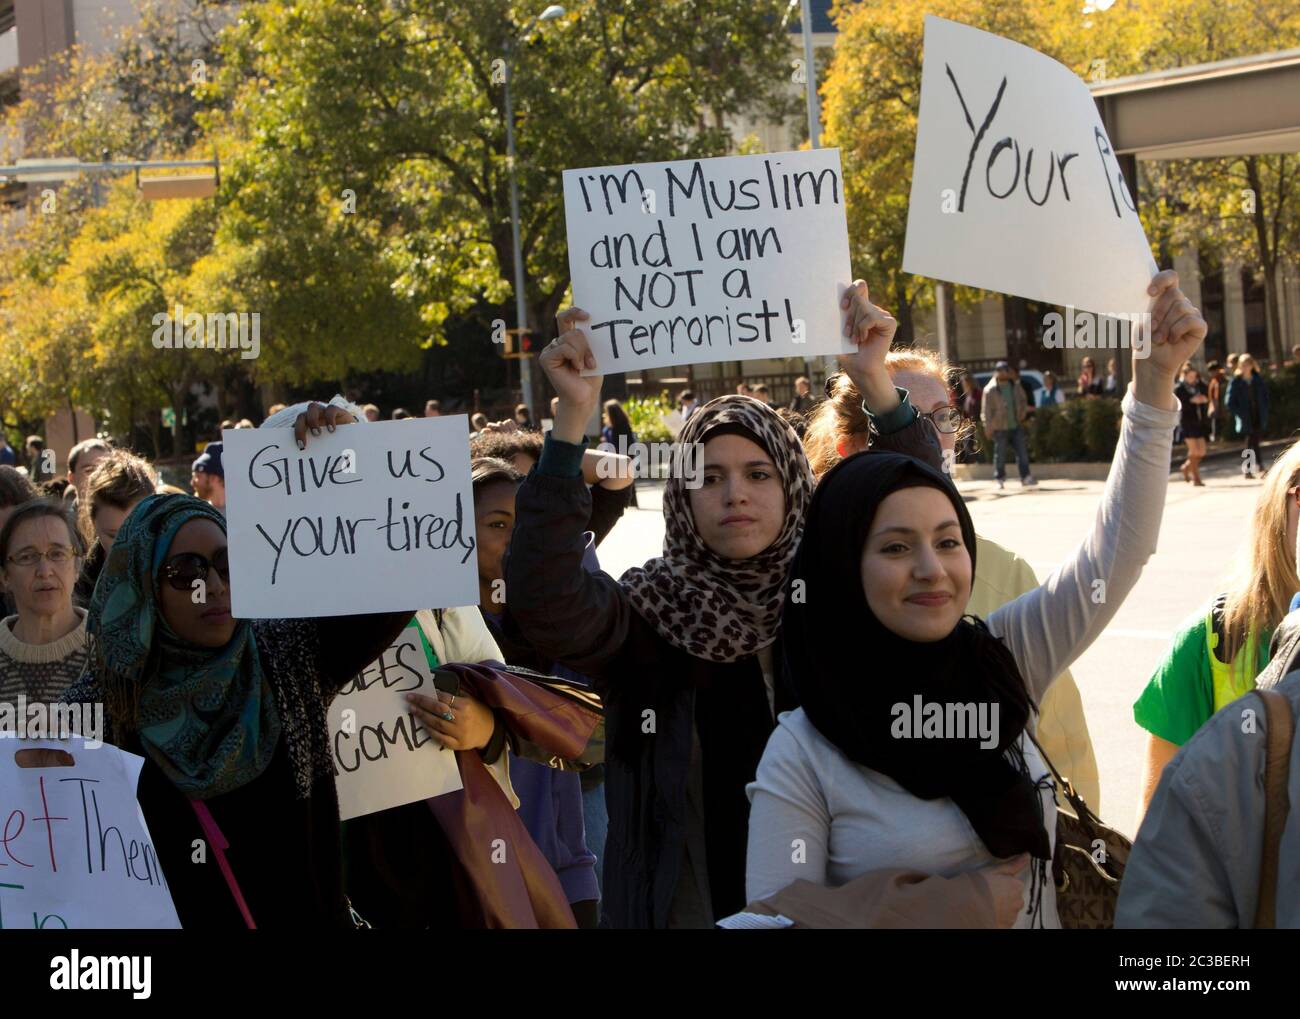 November 22 2015, Austin Texas USA: Group gathers at Wooldridge Park in downtown Austin to protest Governor Greg Abbott's decision not to allow Syrian refugees into the state. The Syrian People Solidarity Group organized the protest, which included several hundred people   © Marjorie Kamys Cotera /Daemmrich Photography Stock Photo